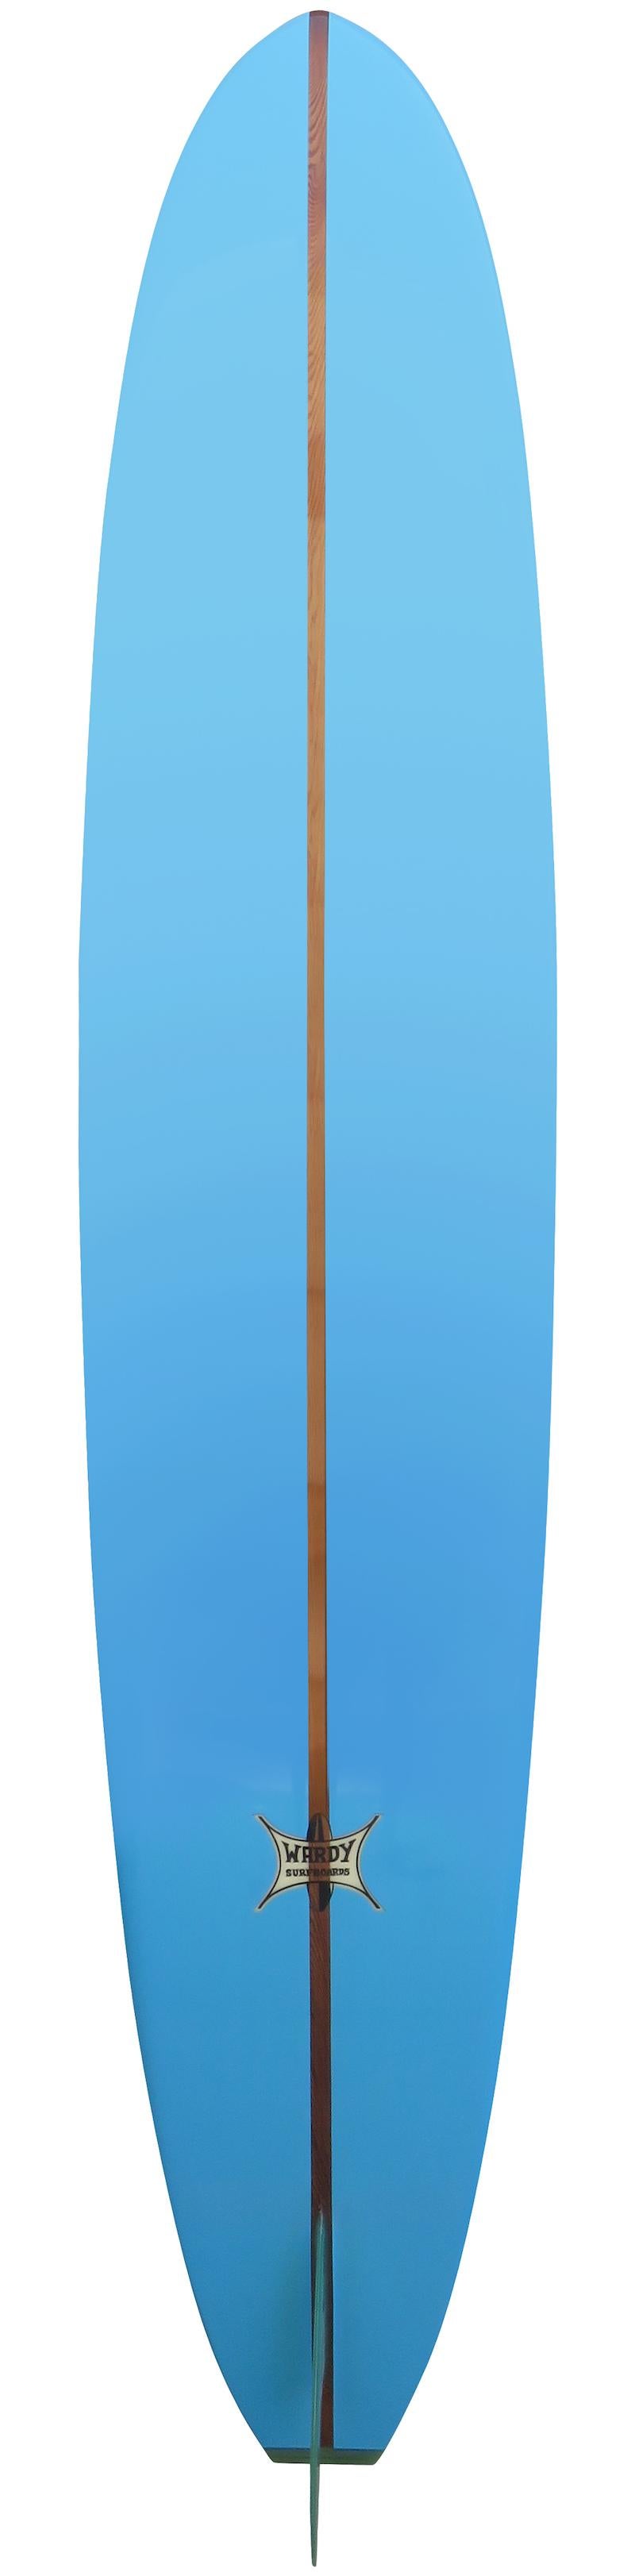 1960s replica Wardy semi gun shaped by Jim “Genius” Phillips. Features a single 3/4? redwood stringer design with beautiful light blue pigment. This collectible surfboard was crafted using all original materials from the Wardy shop including foam